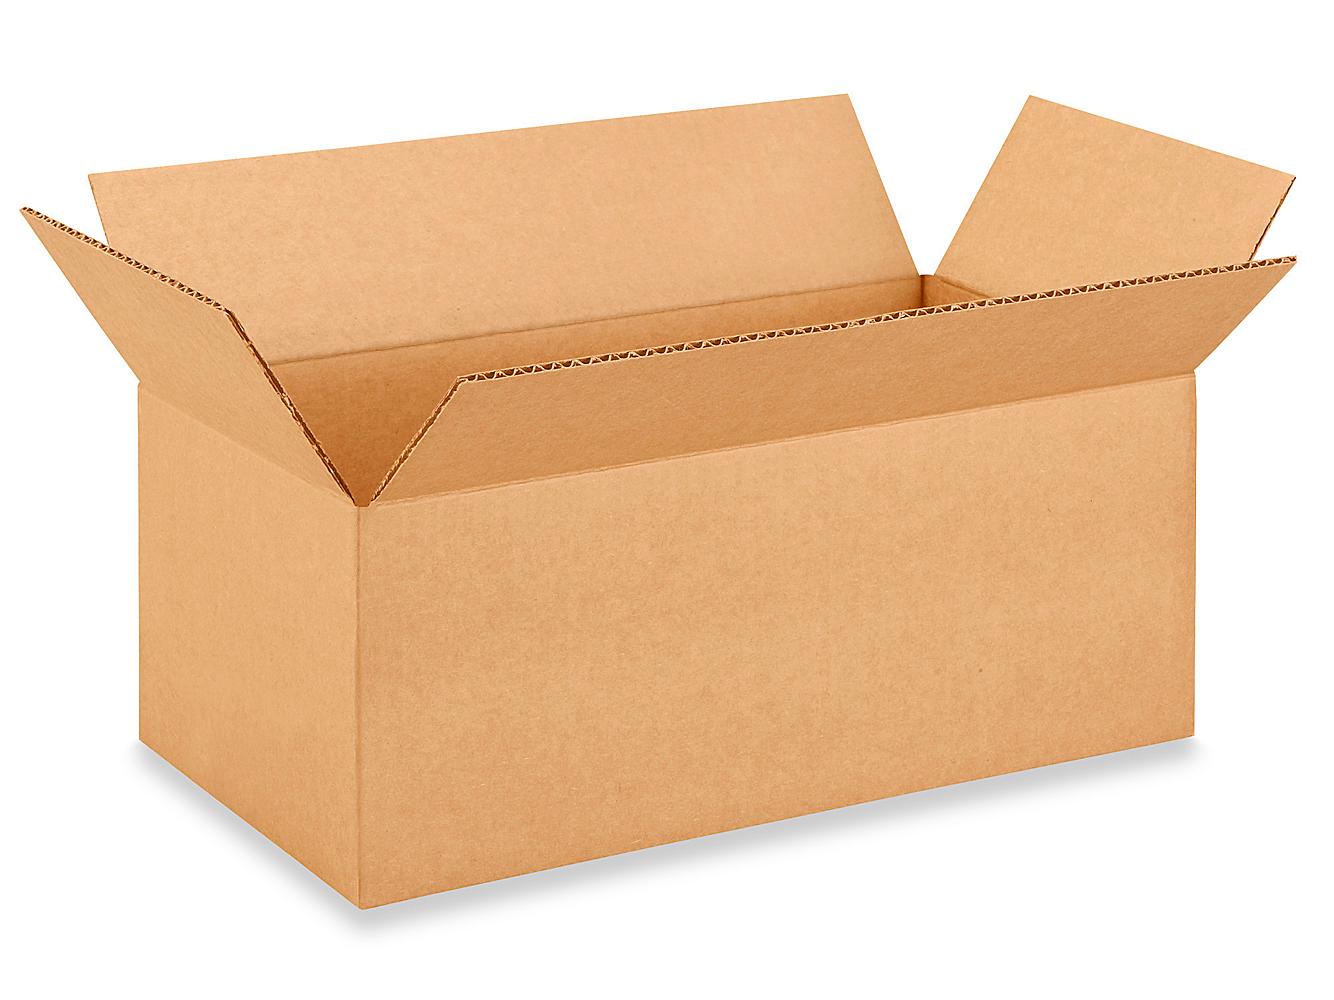 25 NEW 8 x 6 x 2 Corrugated Packing/Shipping Boxes free shipping 